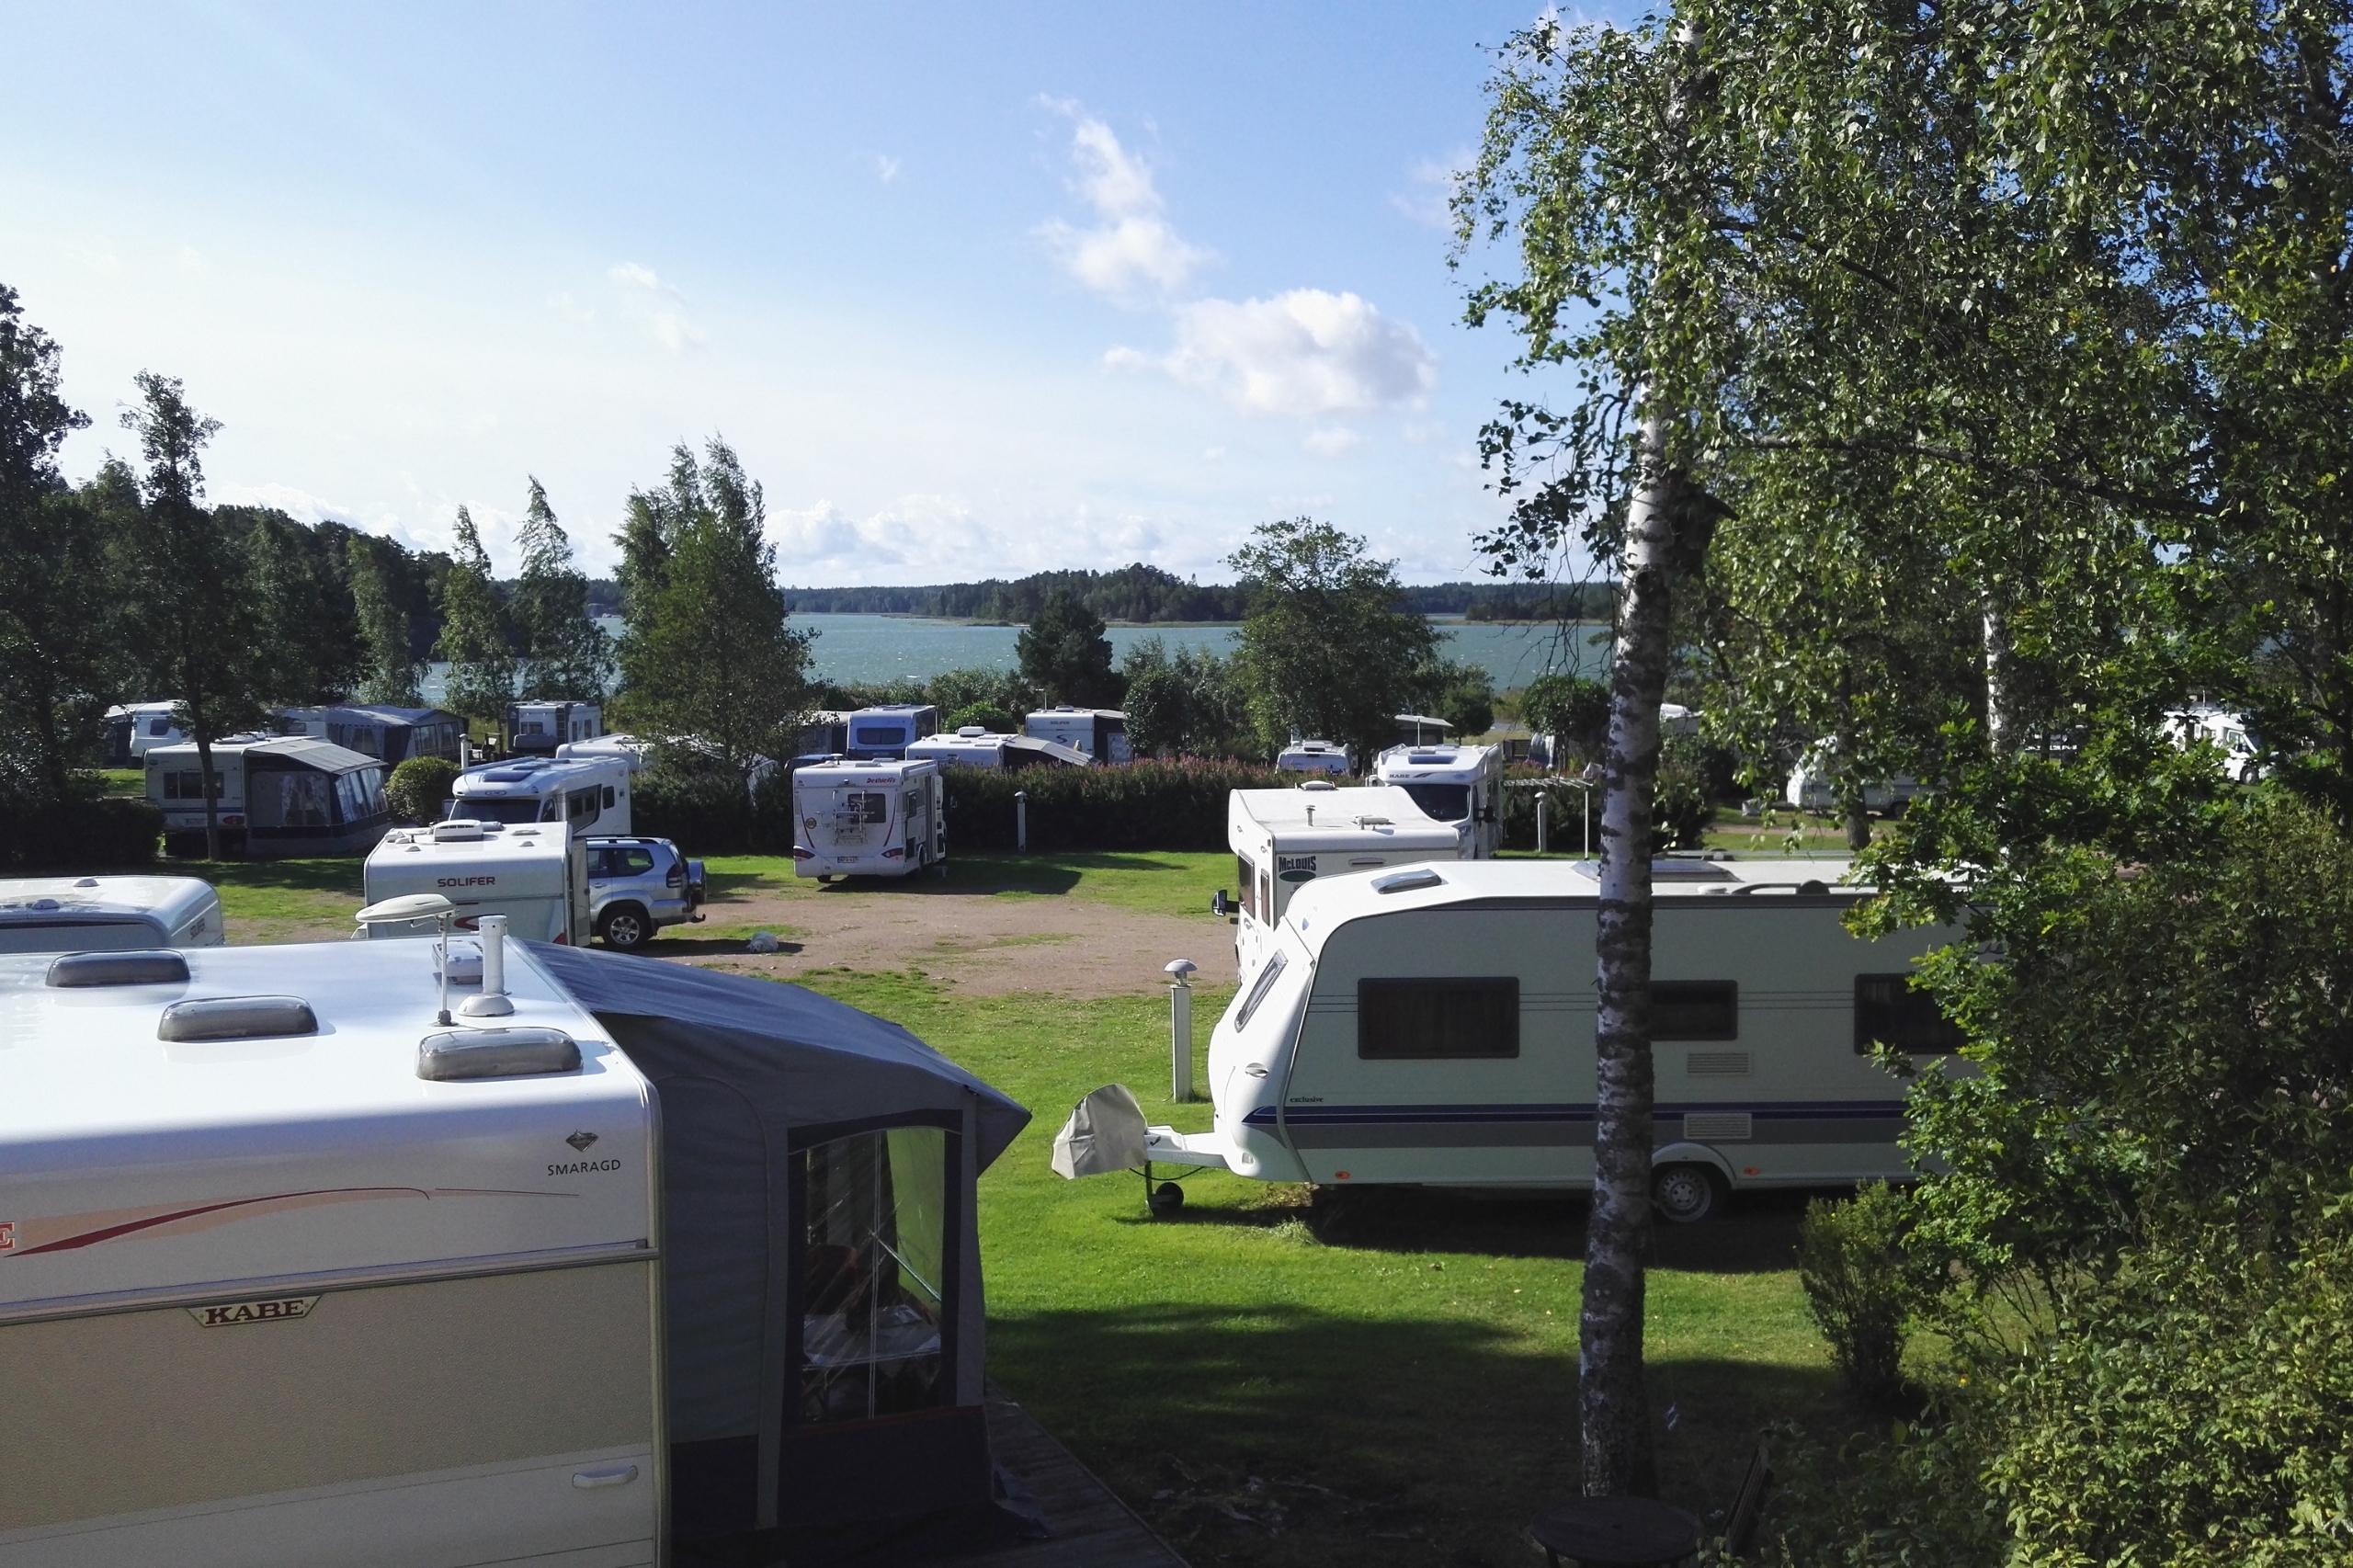 Camping Mussalo on the Finnish archipelago is popular among Finns and tourists, on good grounds.